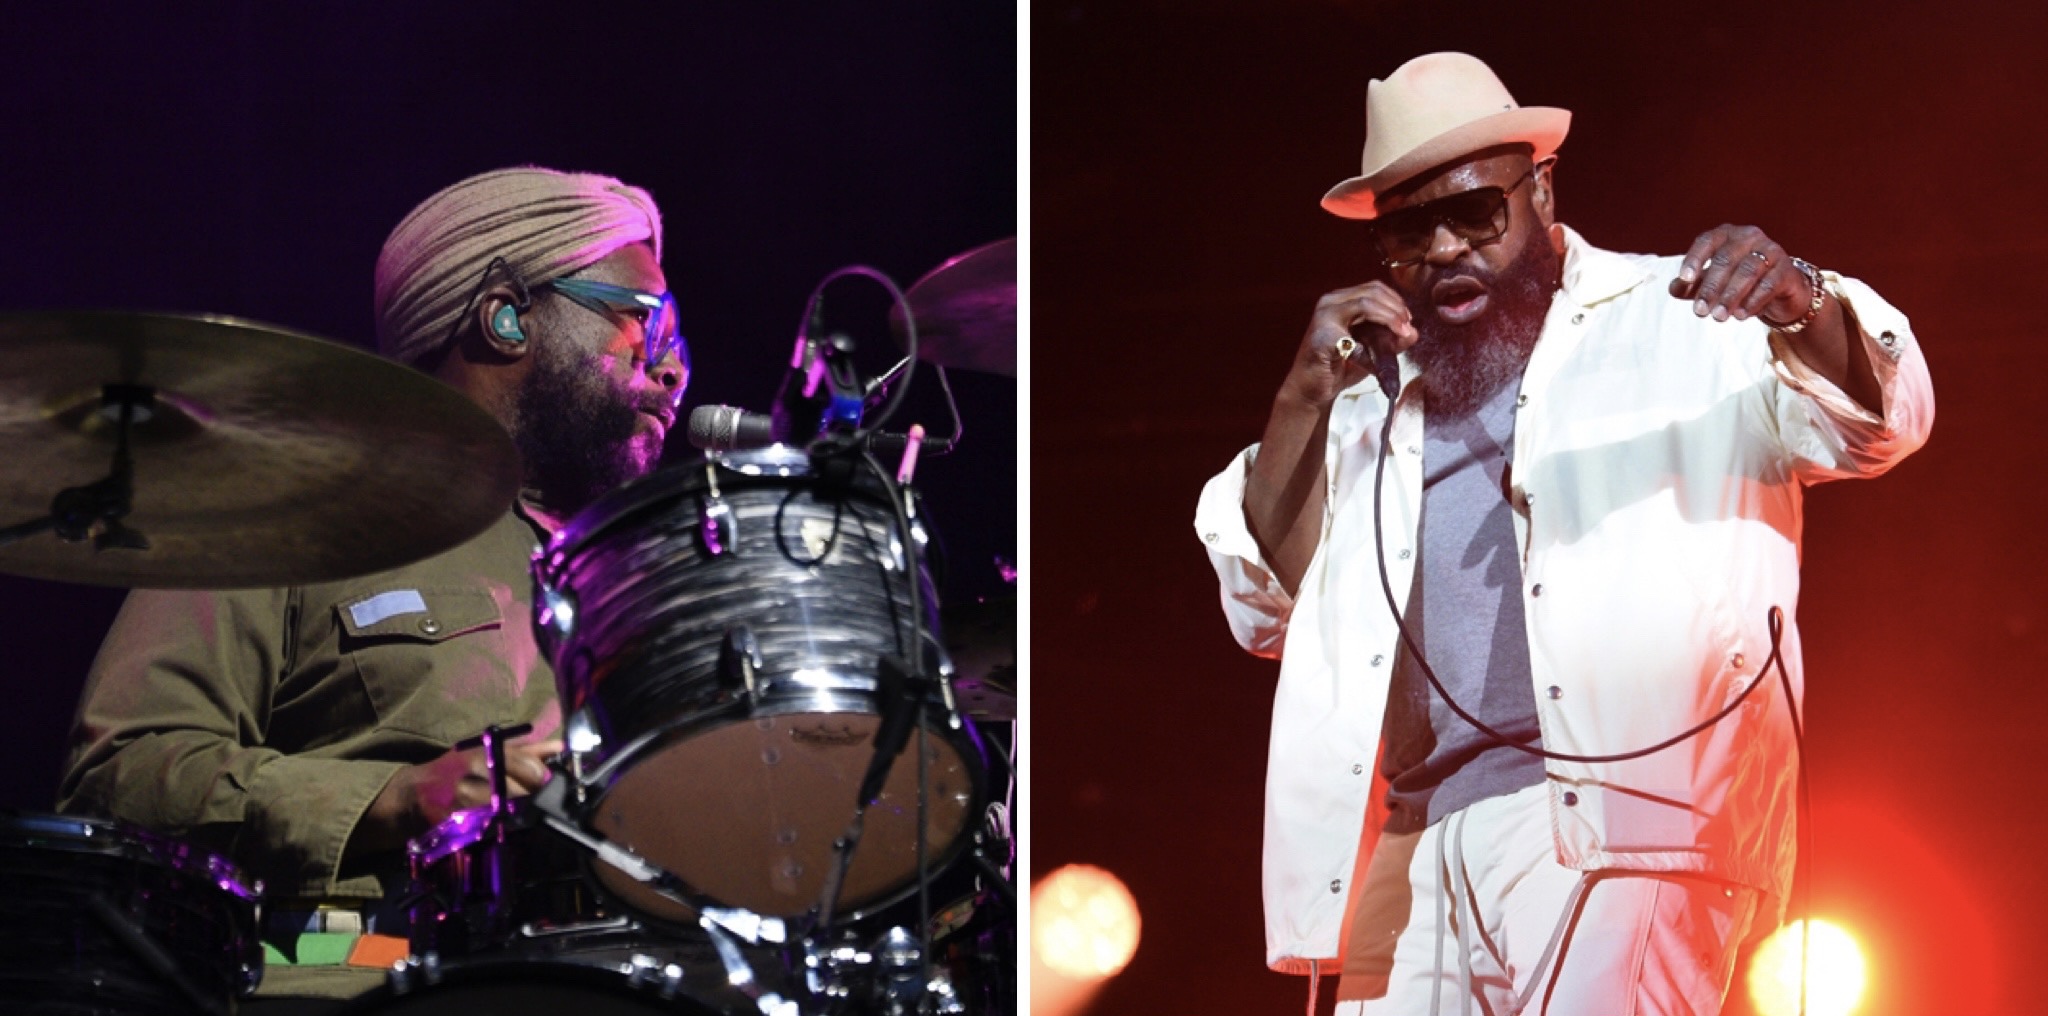 PHOTOS: The Roots, Bran Van 3000 & more magic at the Montreal Jazz Fest